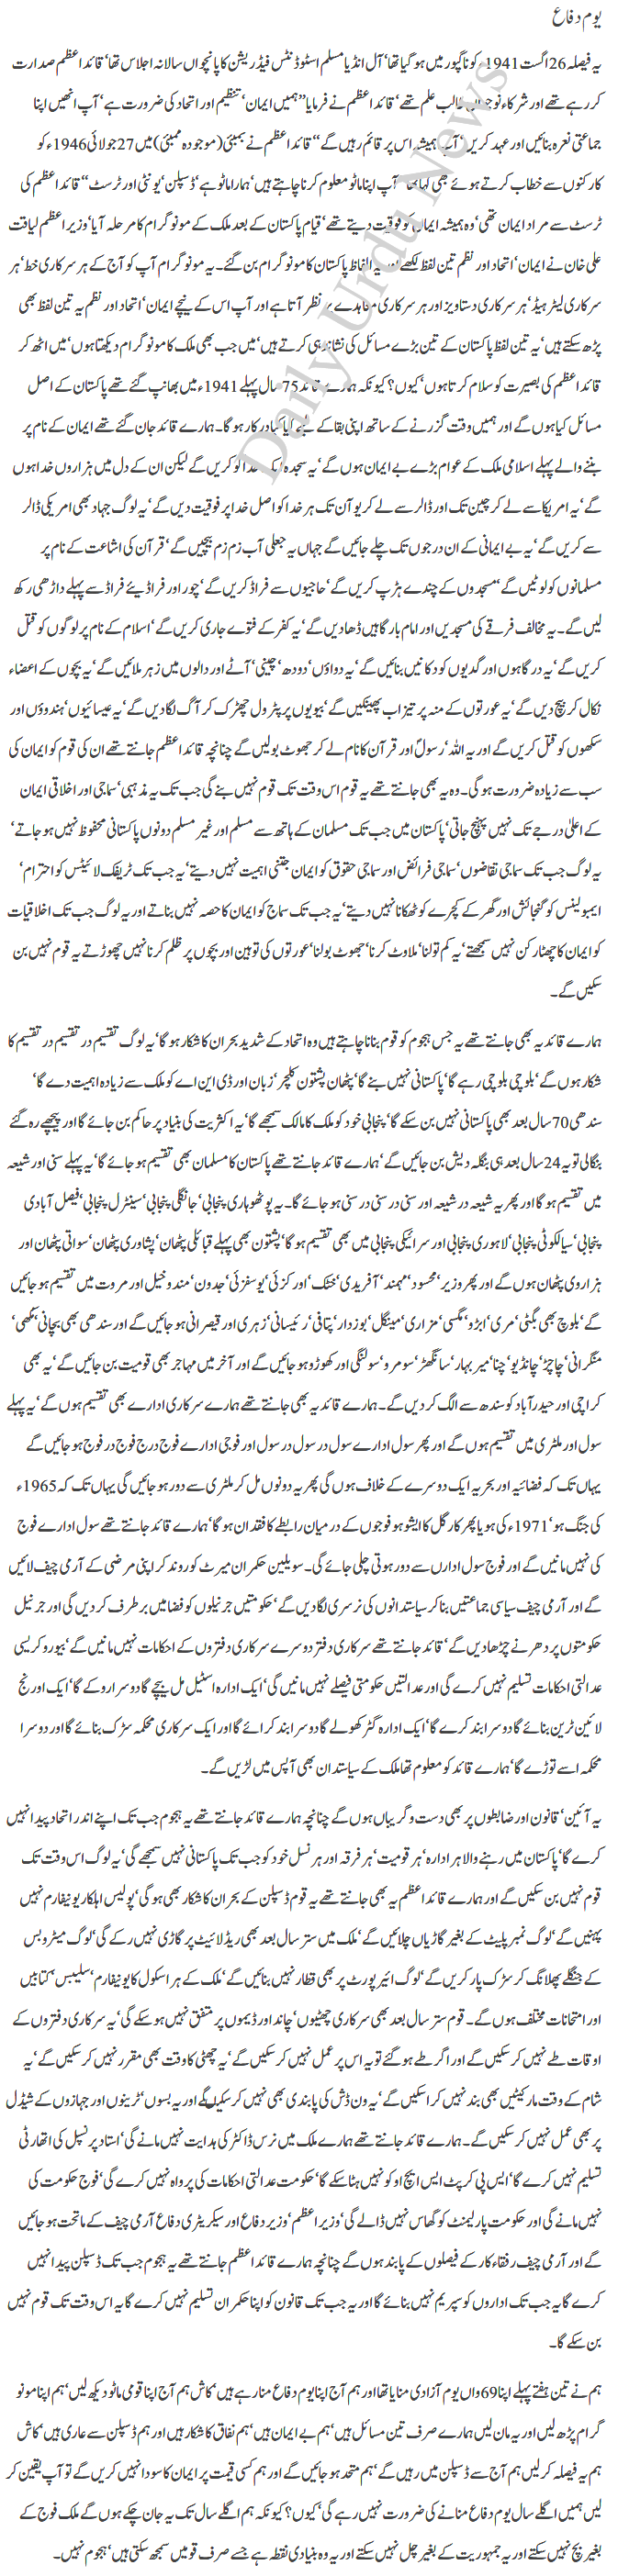 Youme e Defaa by Javed Chaudhry